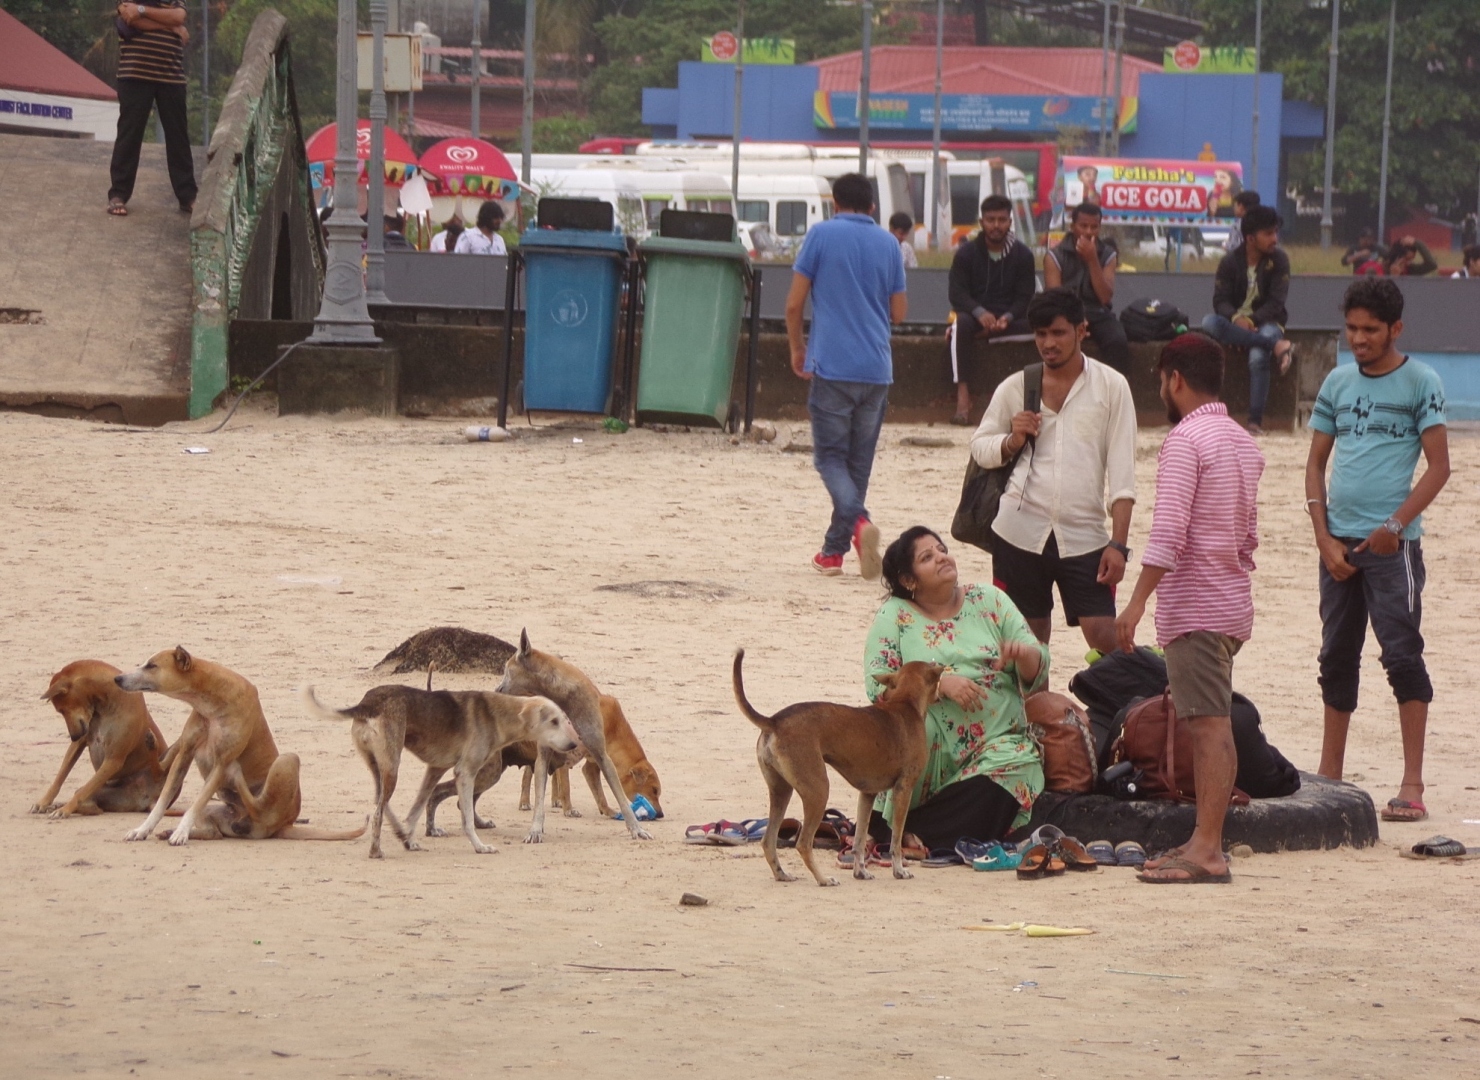 Strays descend on Colva beach in search of food